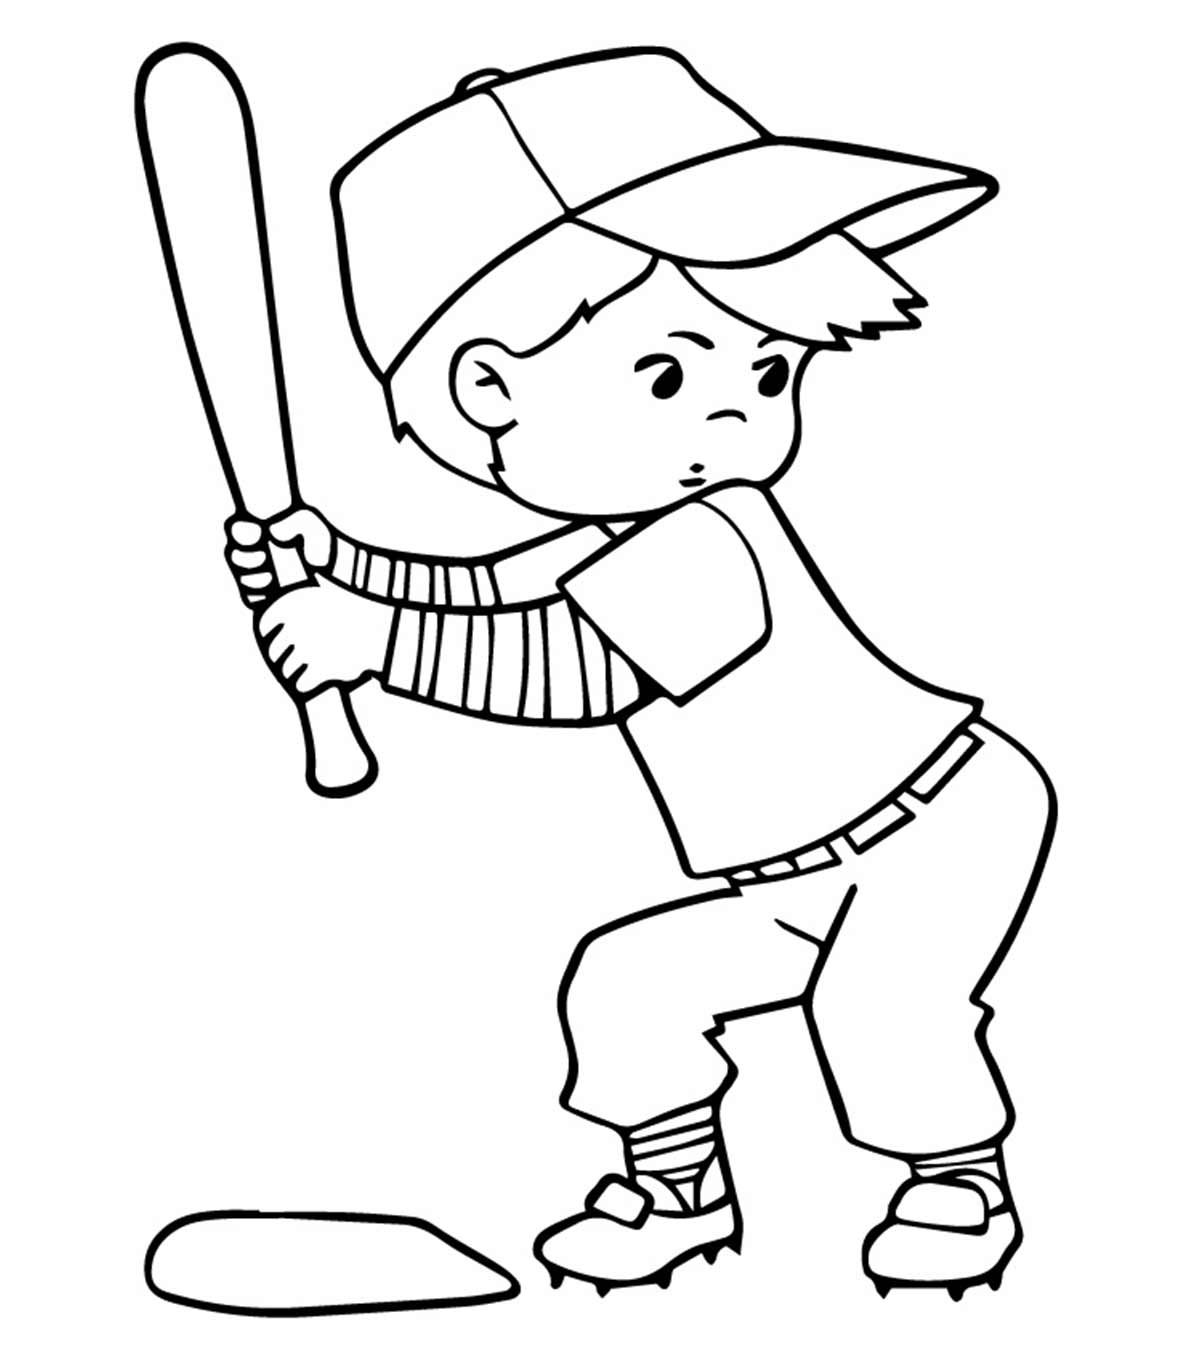 Top 20 Baseball Coloring Pages For Toddlers_image